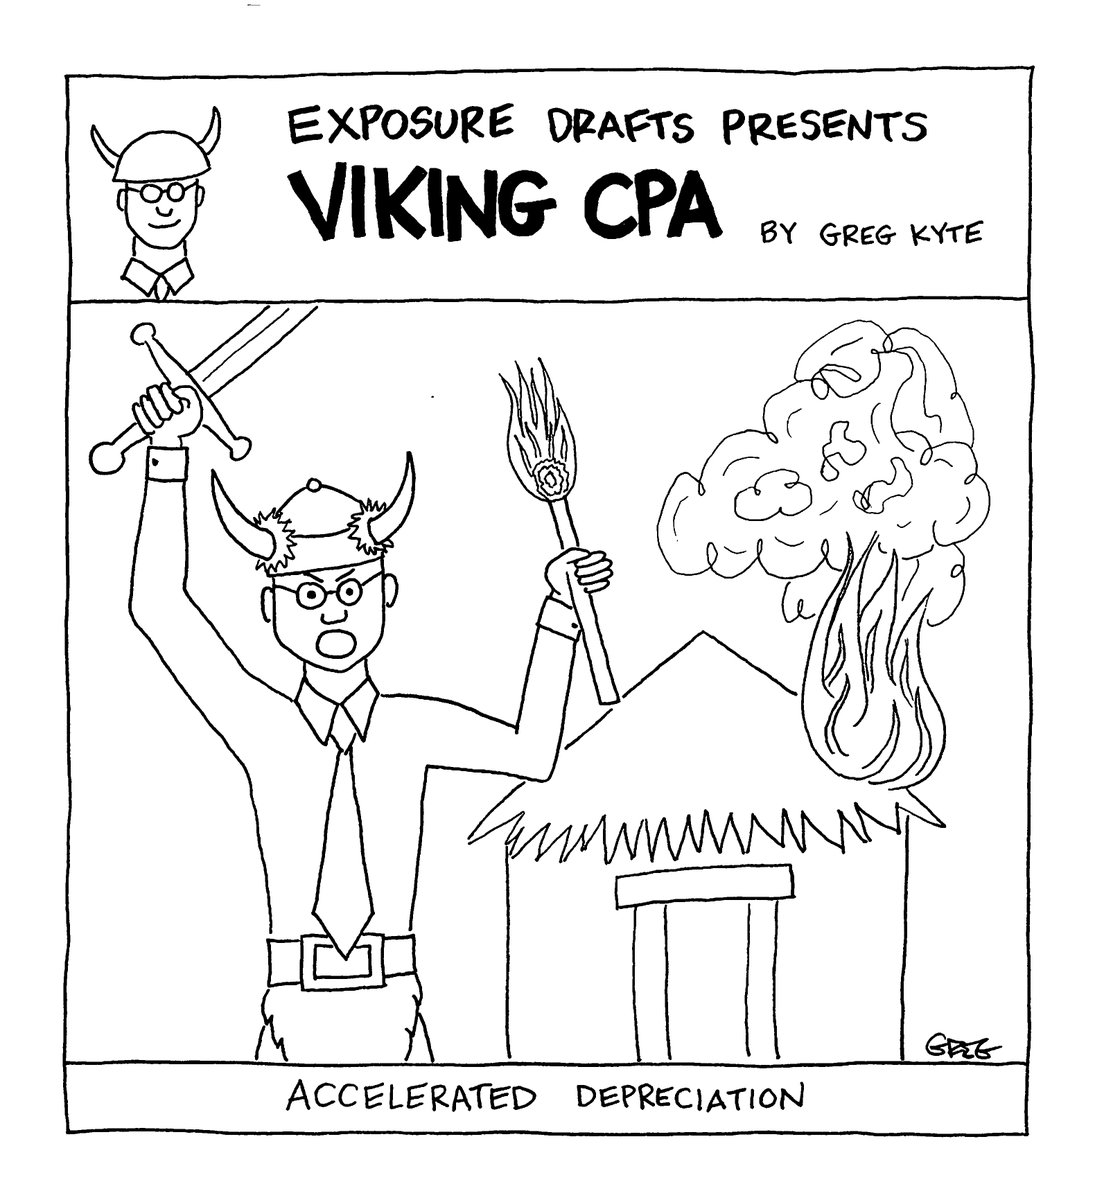 Because when you think about it, casualty loss is just VERY accelerated depreciation. 

Check out new episodes of @ohmyfraud and earn free #CPE through @earmark!

#ExposureDrafts #AccountingCartoon #accounting #cartoon #CPA #CPAlife #AcceleratedDepreciation #Tax #TaxPrep